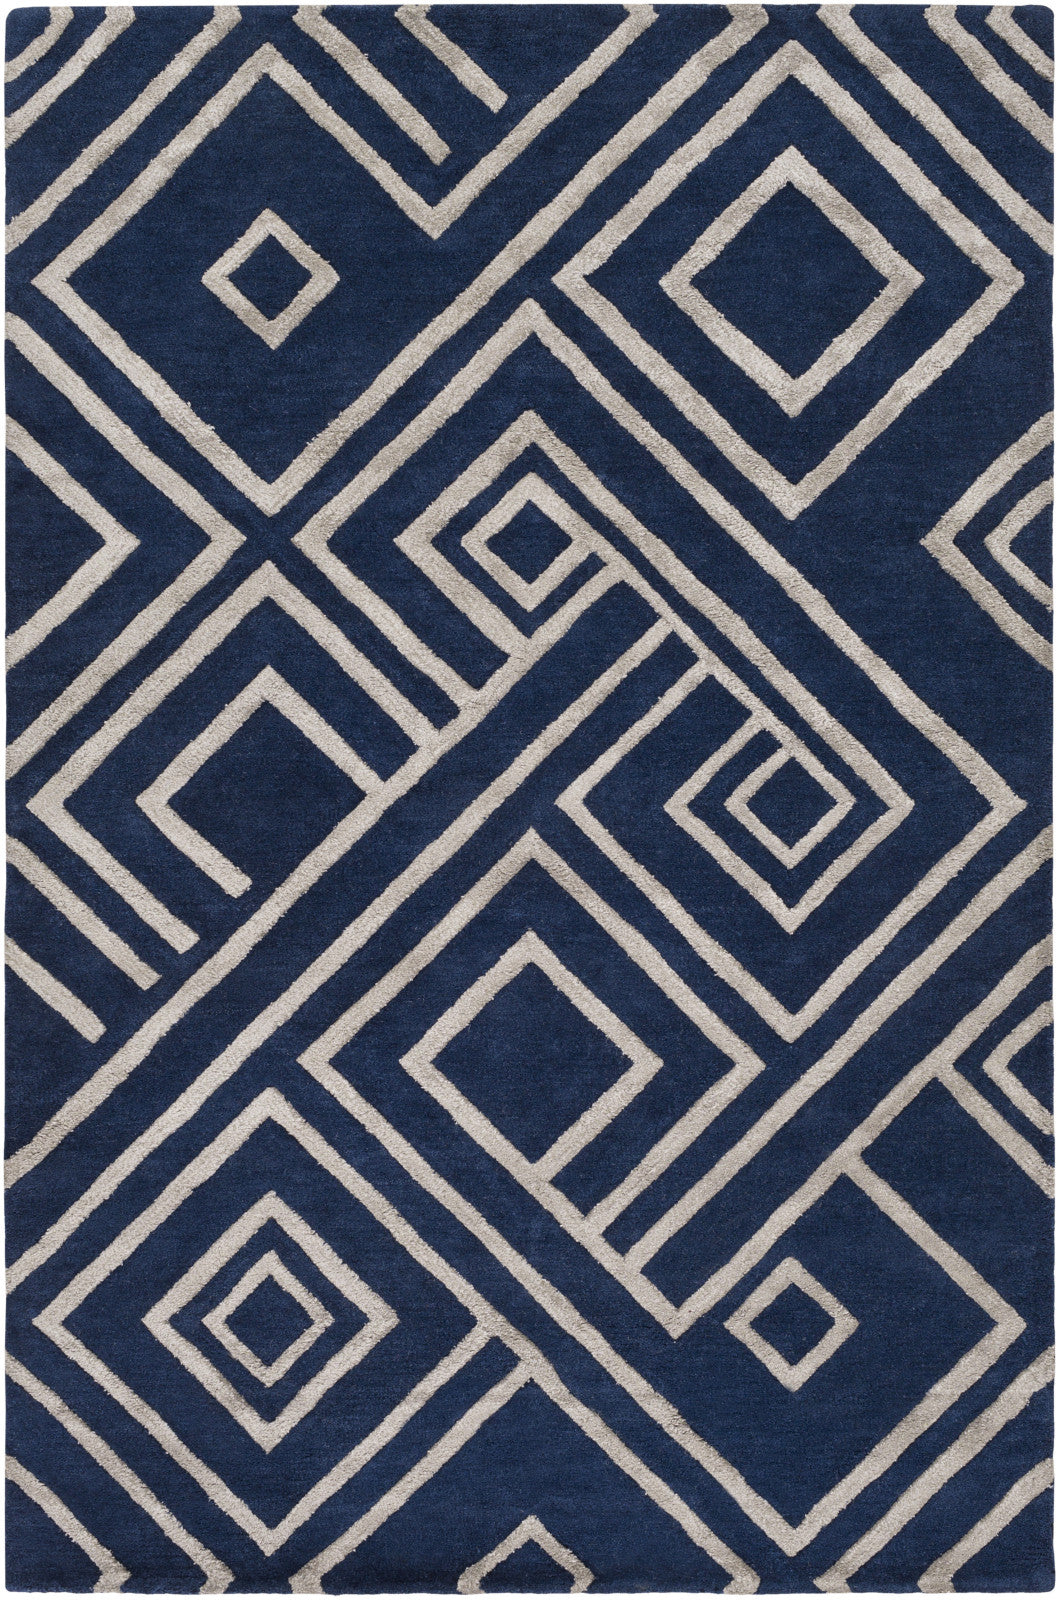 Chamber CHB-1010 Blue Hand Tufted Area Rug by Surya